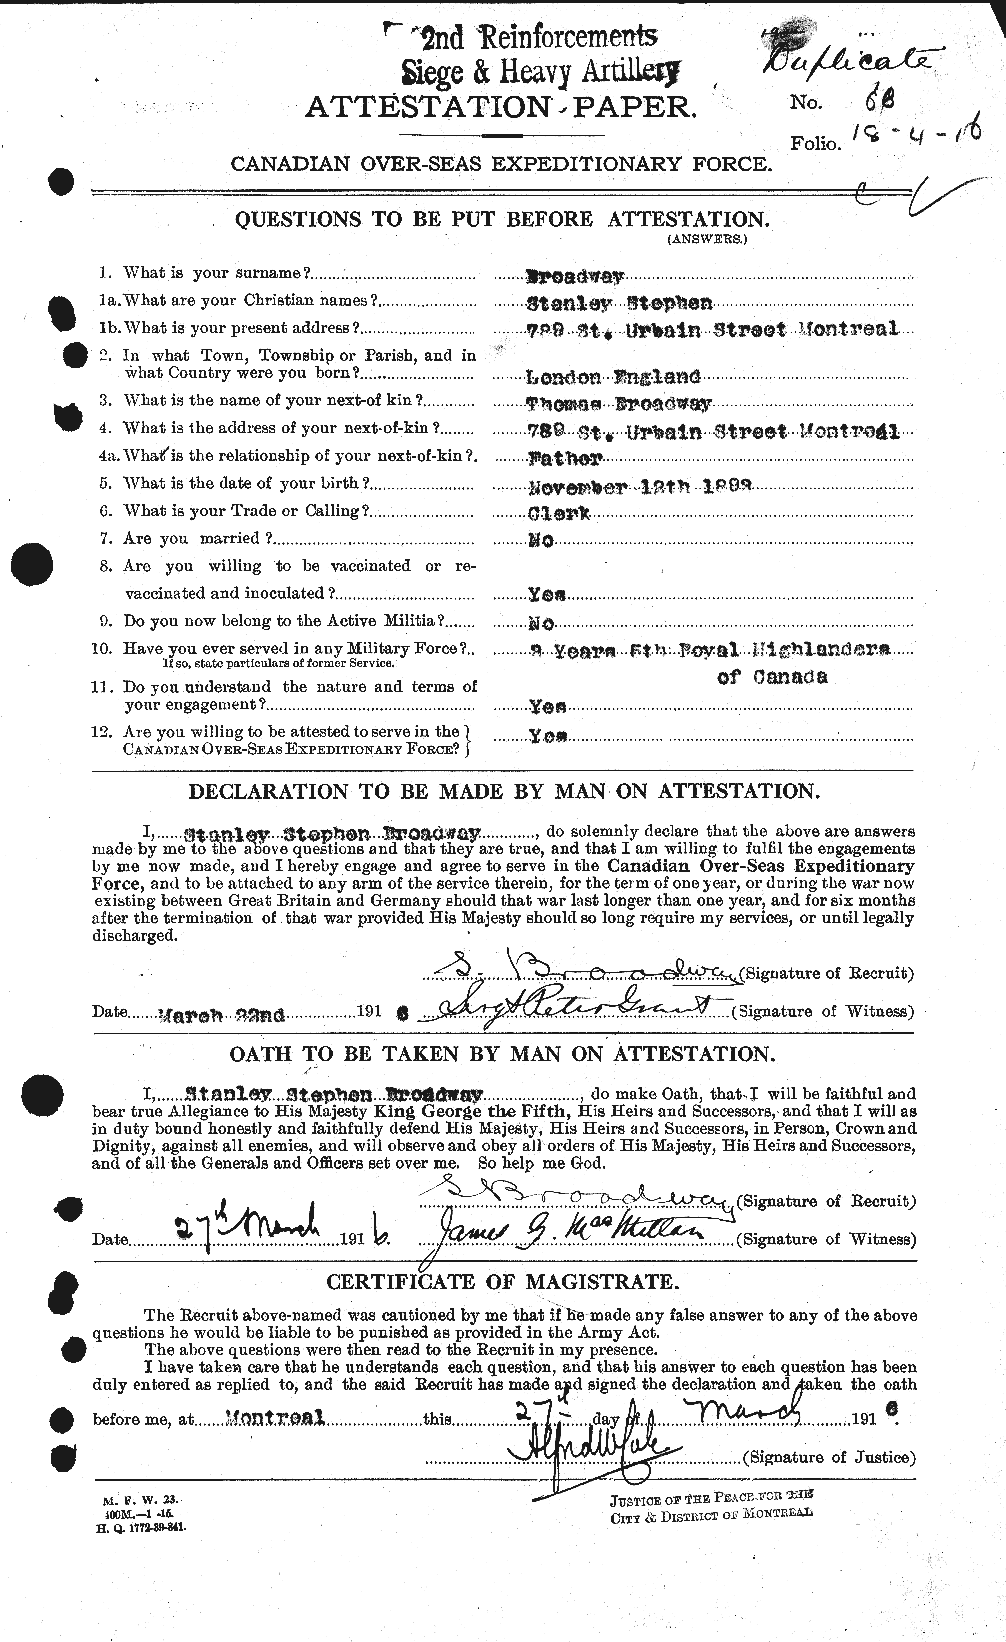 Personnel Records of the First World War - CEF 263827a